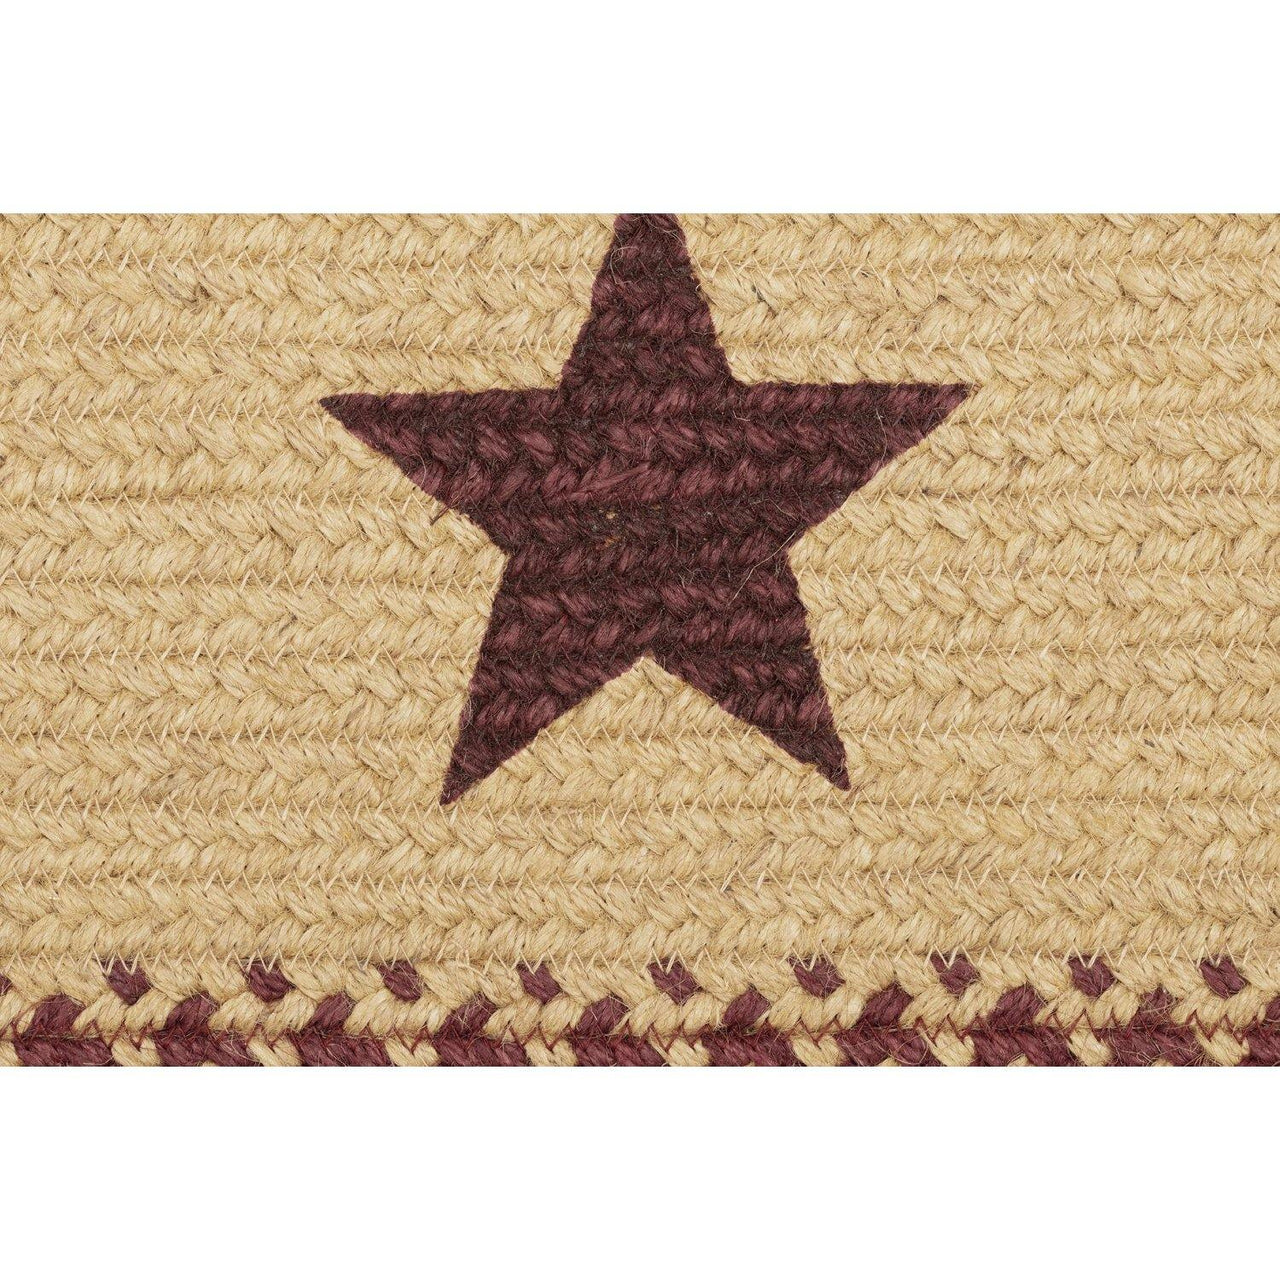 Burgundy Red Primitive Jute Braided Rug Rect Stencil Stars 27"x48" with Rug Pad VHC Brands - The Fox Decor